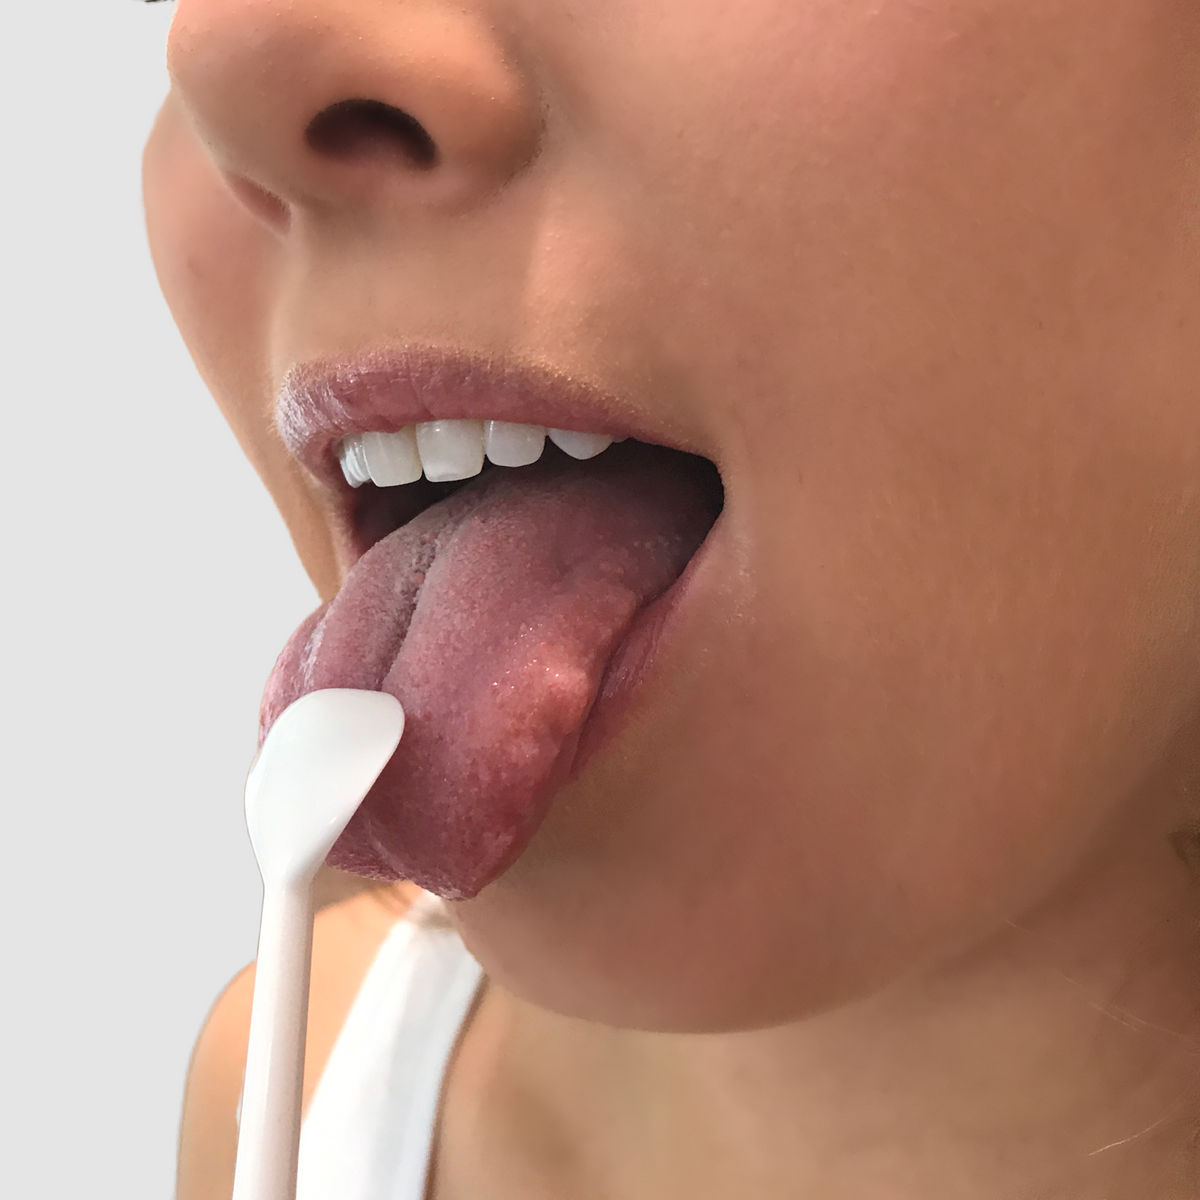 cleaning tongue surface 